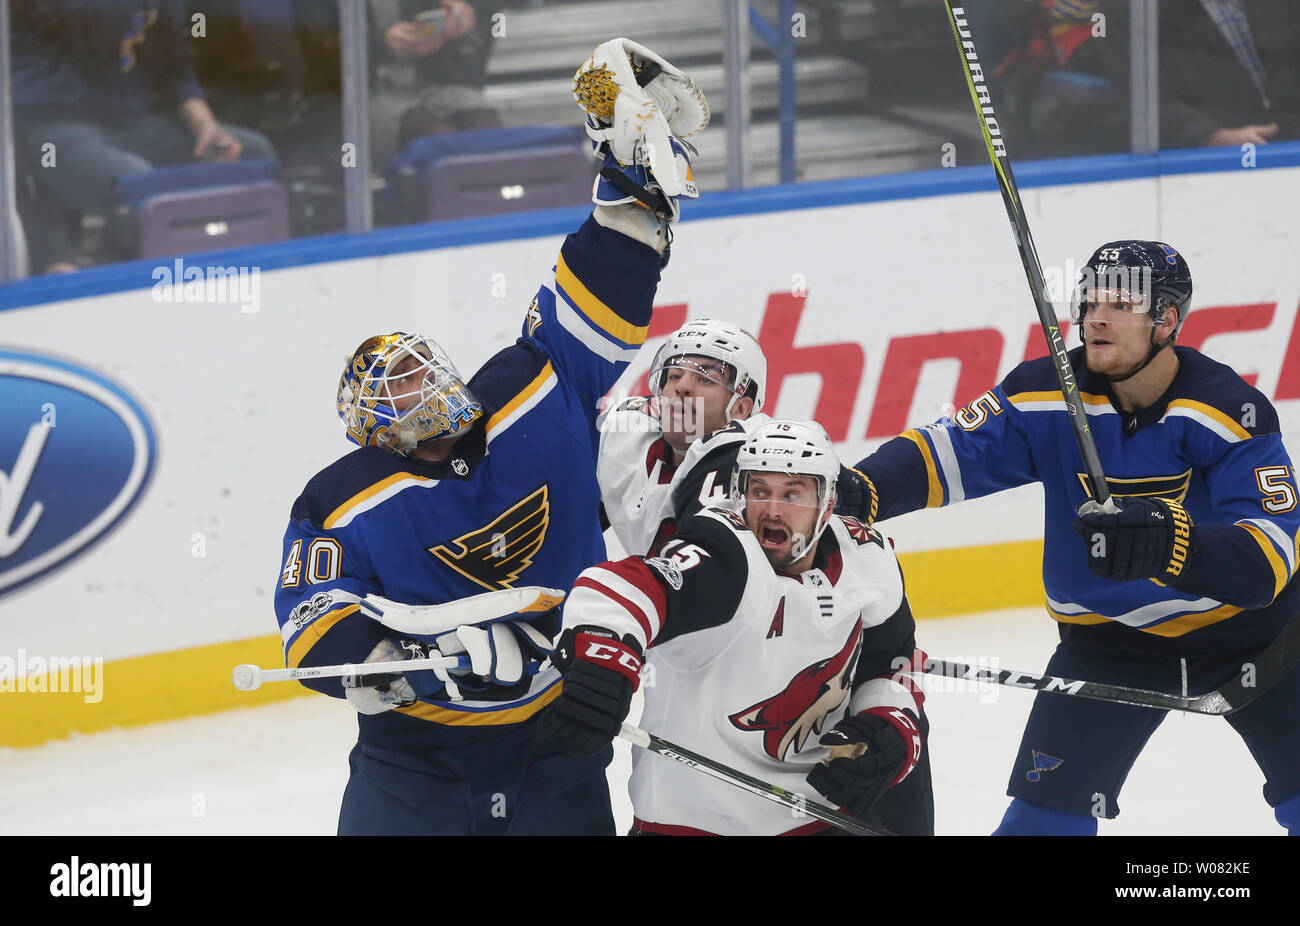 St. Louis Blues goaltender Carter Hutton reaches for the puck over the heads of Arizona Coyotes Brad Richardson (15) and Jordan Martinook in the third period at the Scottrade Center in St. Louis on November 9, 2017. St. Louis defeated Arizona 3-2 in a shootout.    Photo by Bill Greenblatt/UPI Stock Photo